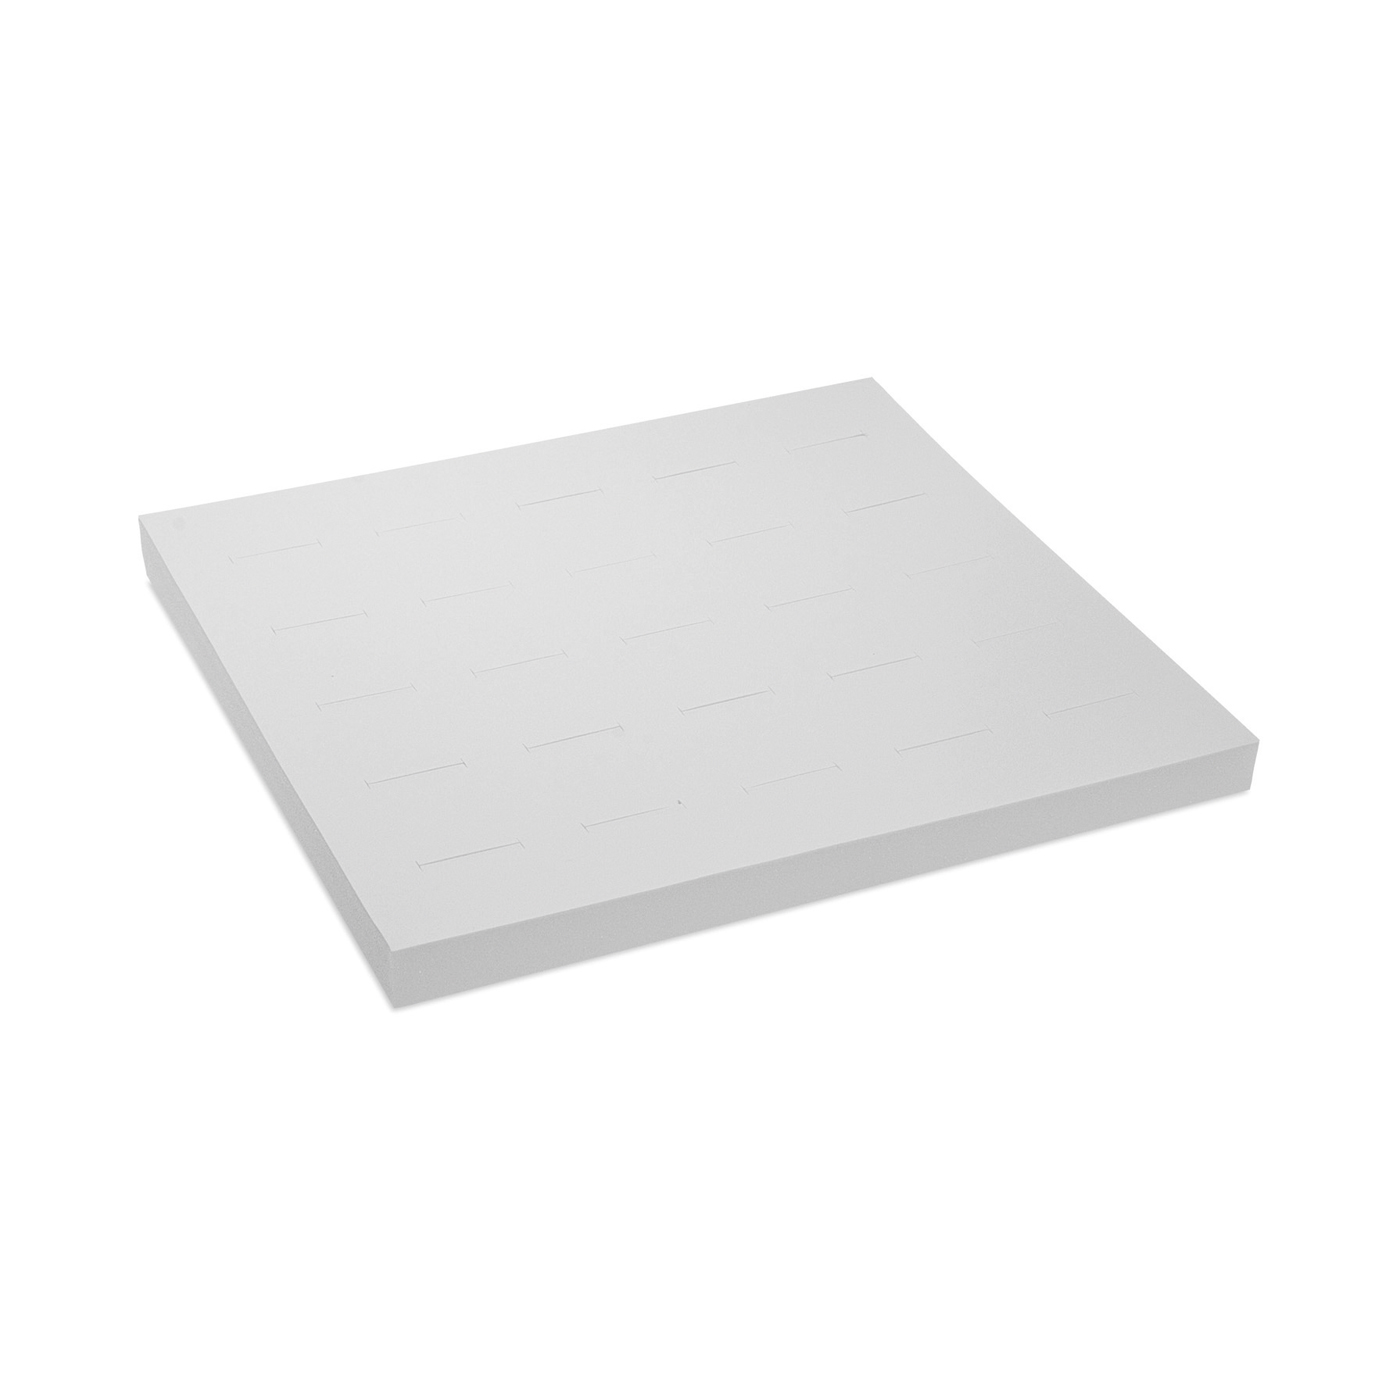 Tray System Inlay, White, for 25 Rings, 224 x 224 mm - 1 piece